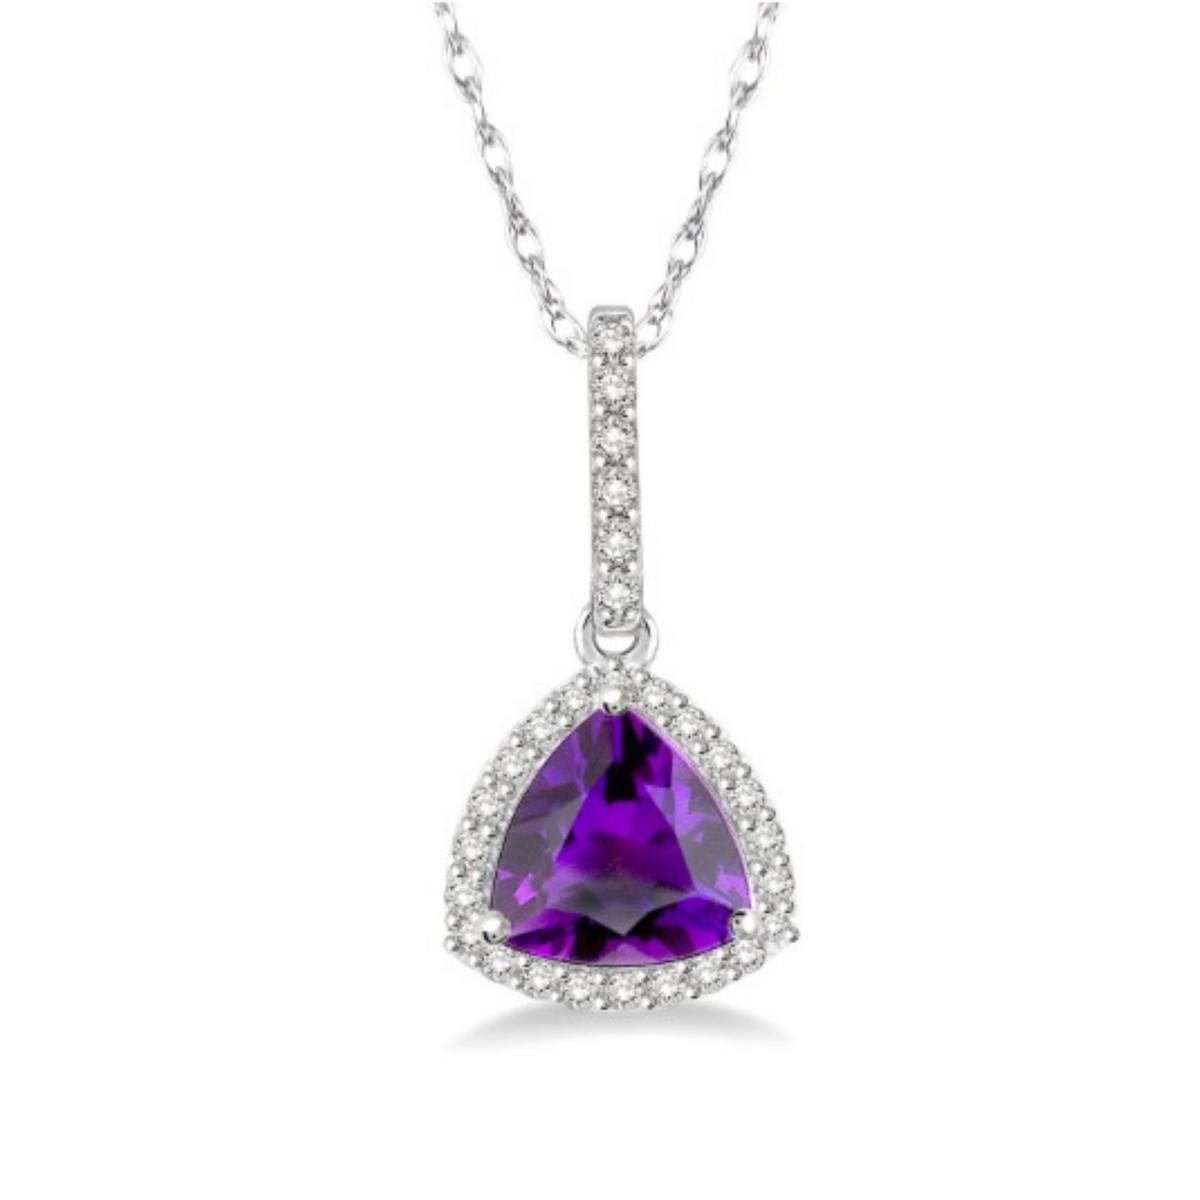 10K White Gold Trillian Amethyst Necklace with Diamonds